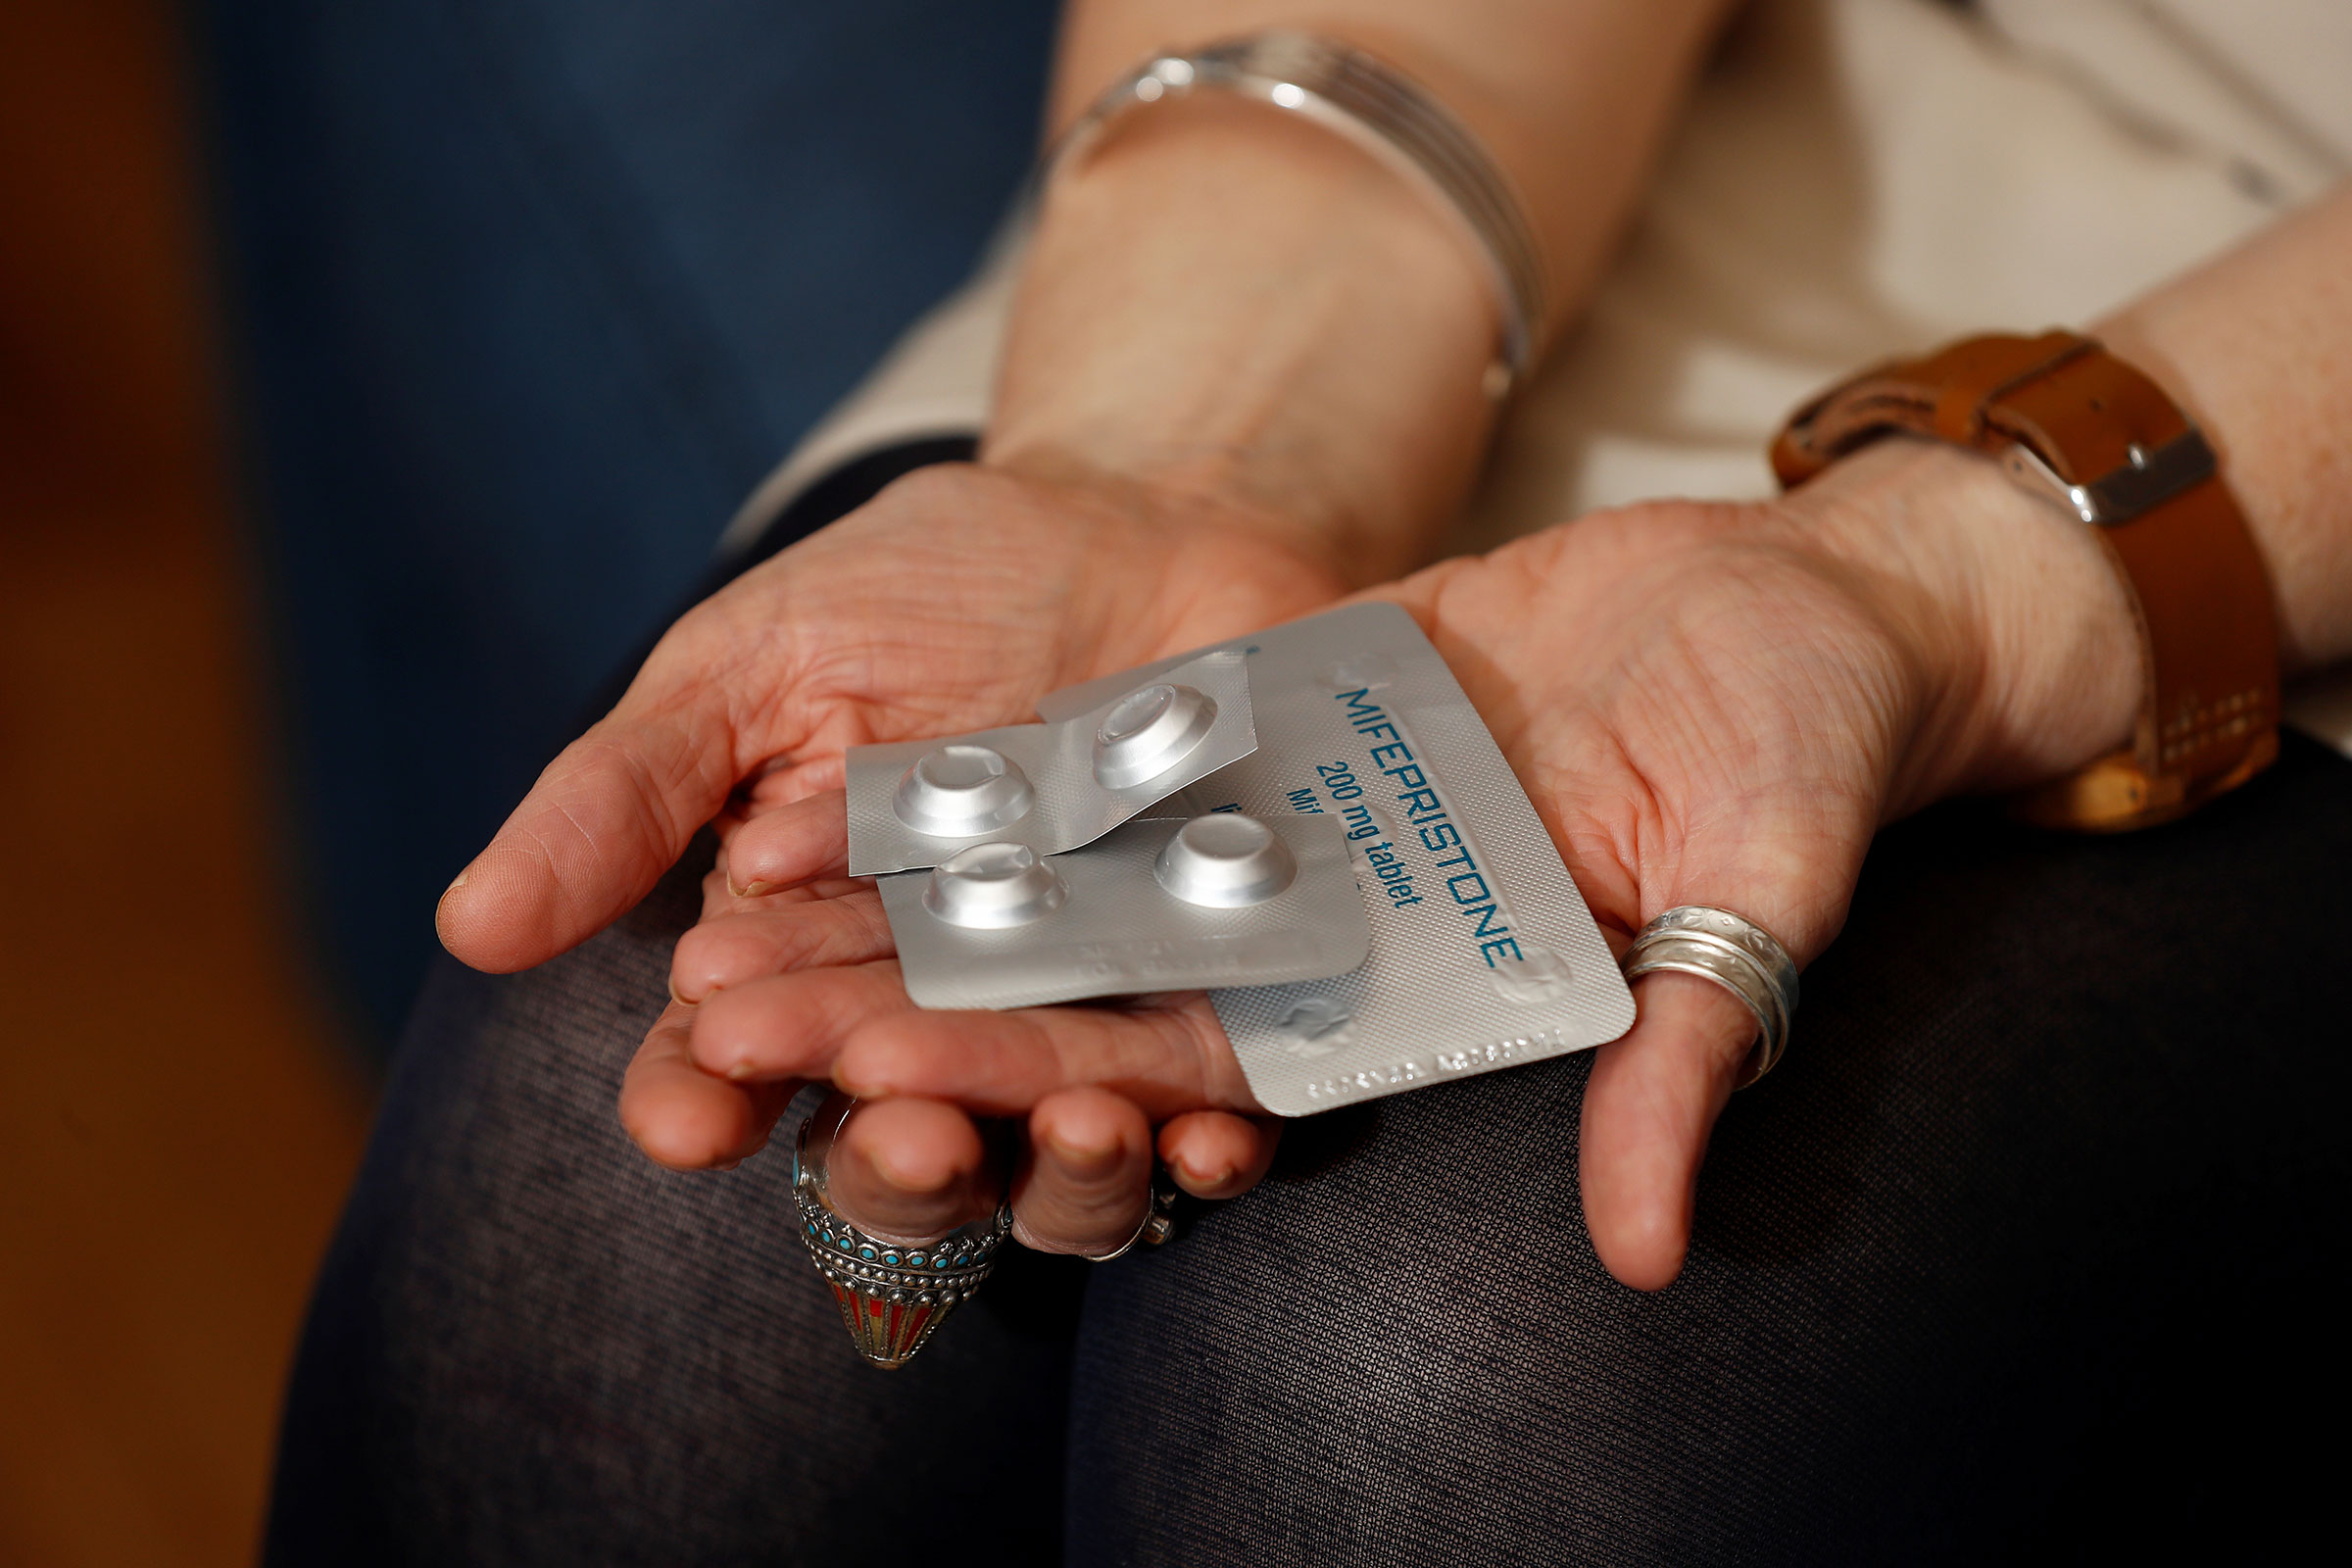 Naomi Connor, Co-Convener of Alliance for Choice, holds medication that helps to bring about a medical abortion, in Belfast, Northern Ireland, on April 7, 2020. (Jason Cairnduff—Reuters)